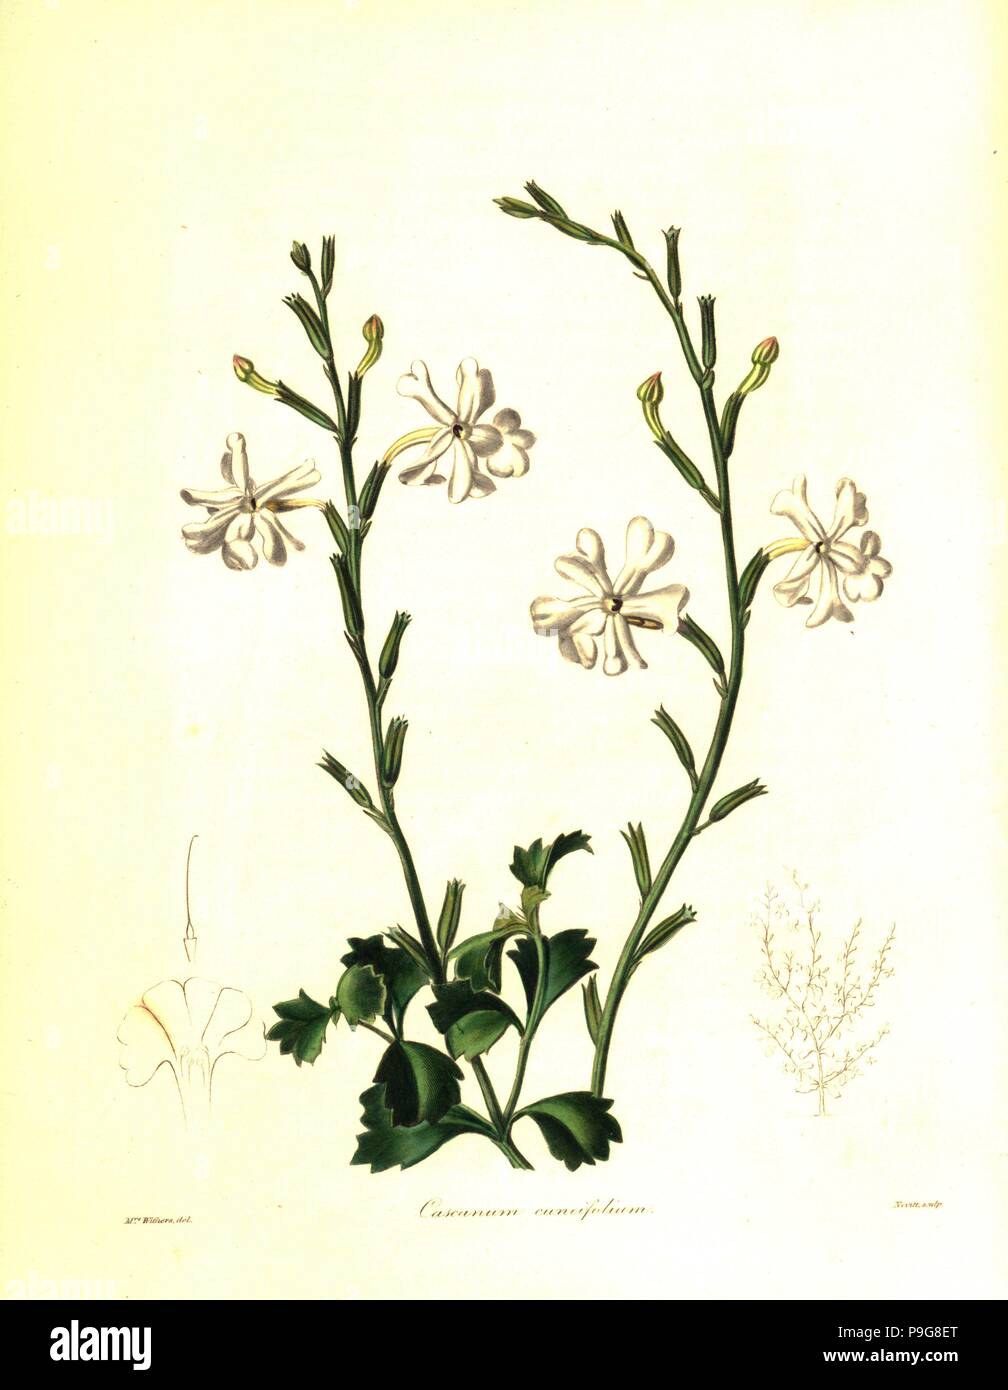 Wedge-leaved chascanum, Chascanum cuneifolium. Handcoloured copperplate engraving by S. Nevitt after a botanical illustration by Mrs Augusta Withers from Benjamin Maund and the Rev. John Stevens Henslow's The Botanist, London, 1836. Stock Photo